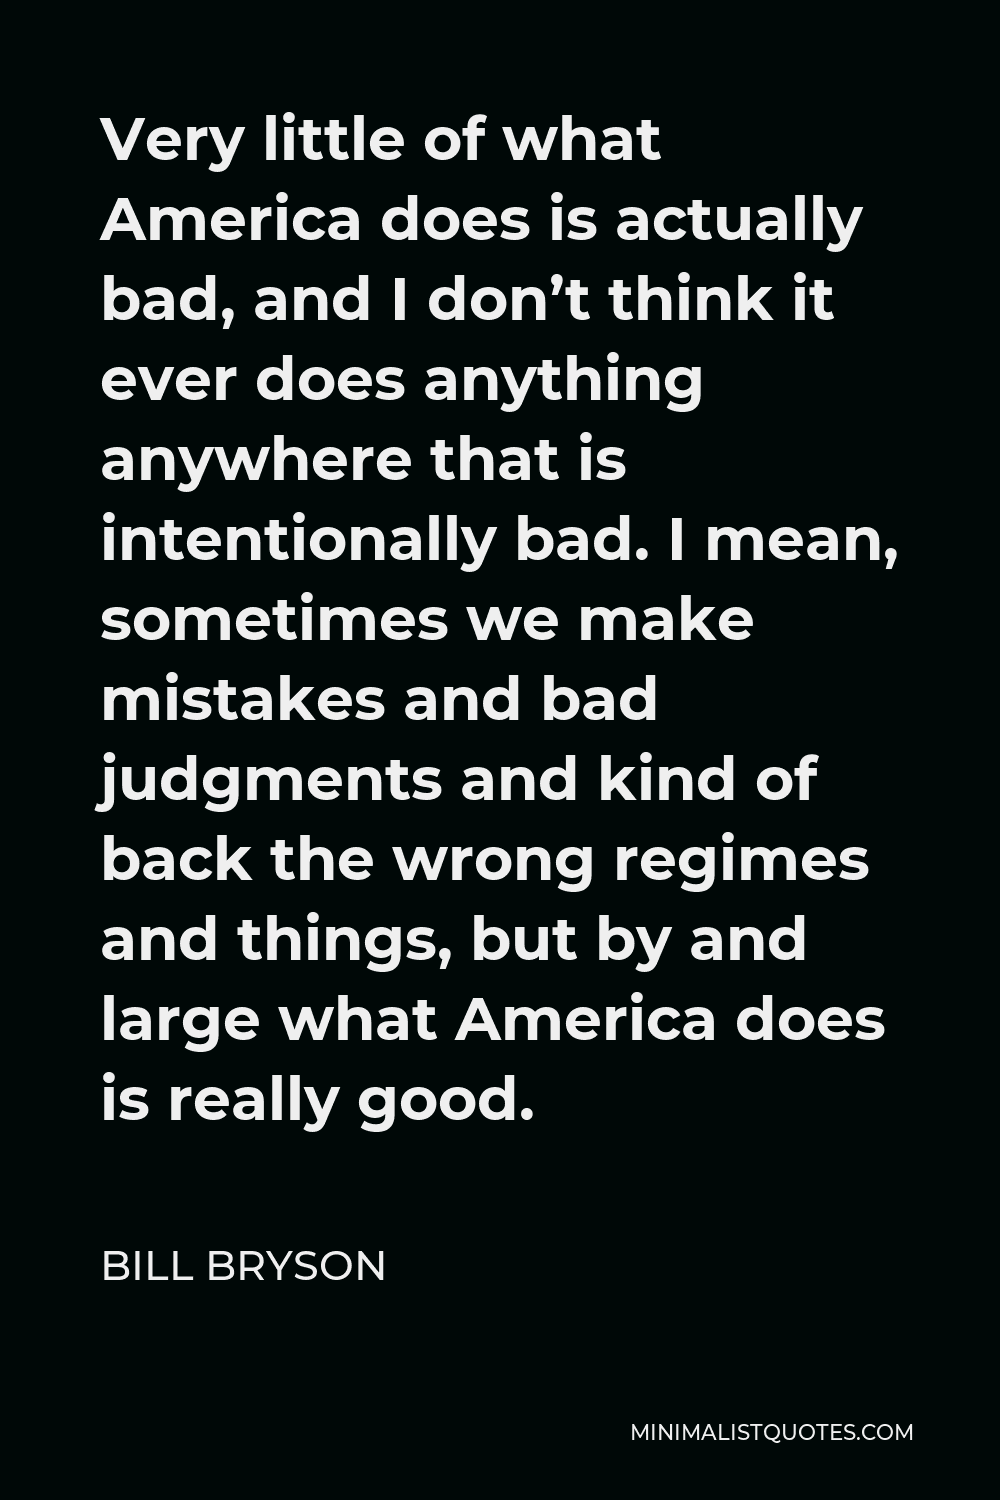 Bill Bryson Quote - Very little of what America does is actually bad, and I don’t think it ever does anything anywhere that is intentionally bad. I mean, sometimes we make mistakes and bad judgments and kind of back the wrong regimes and things, but by and large what America does is really good.